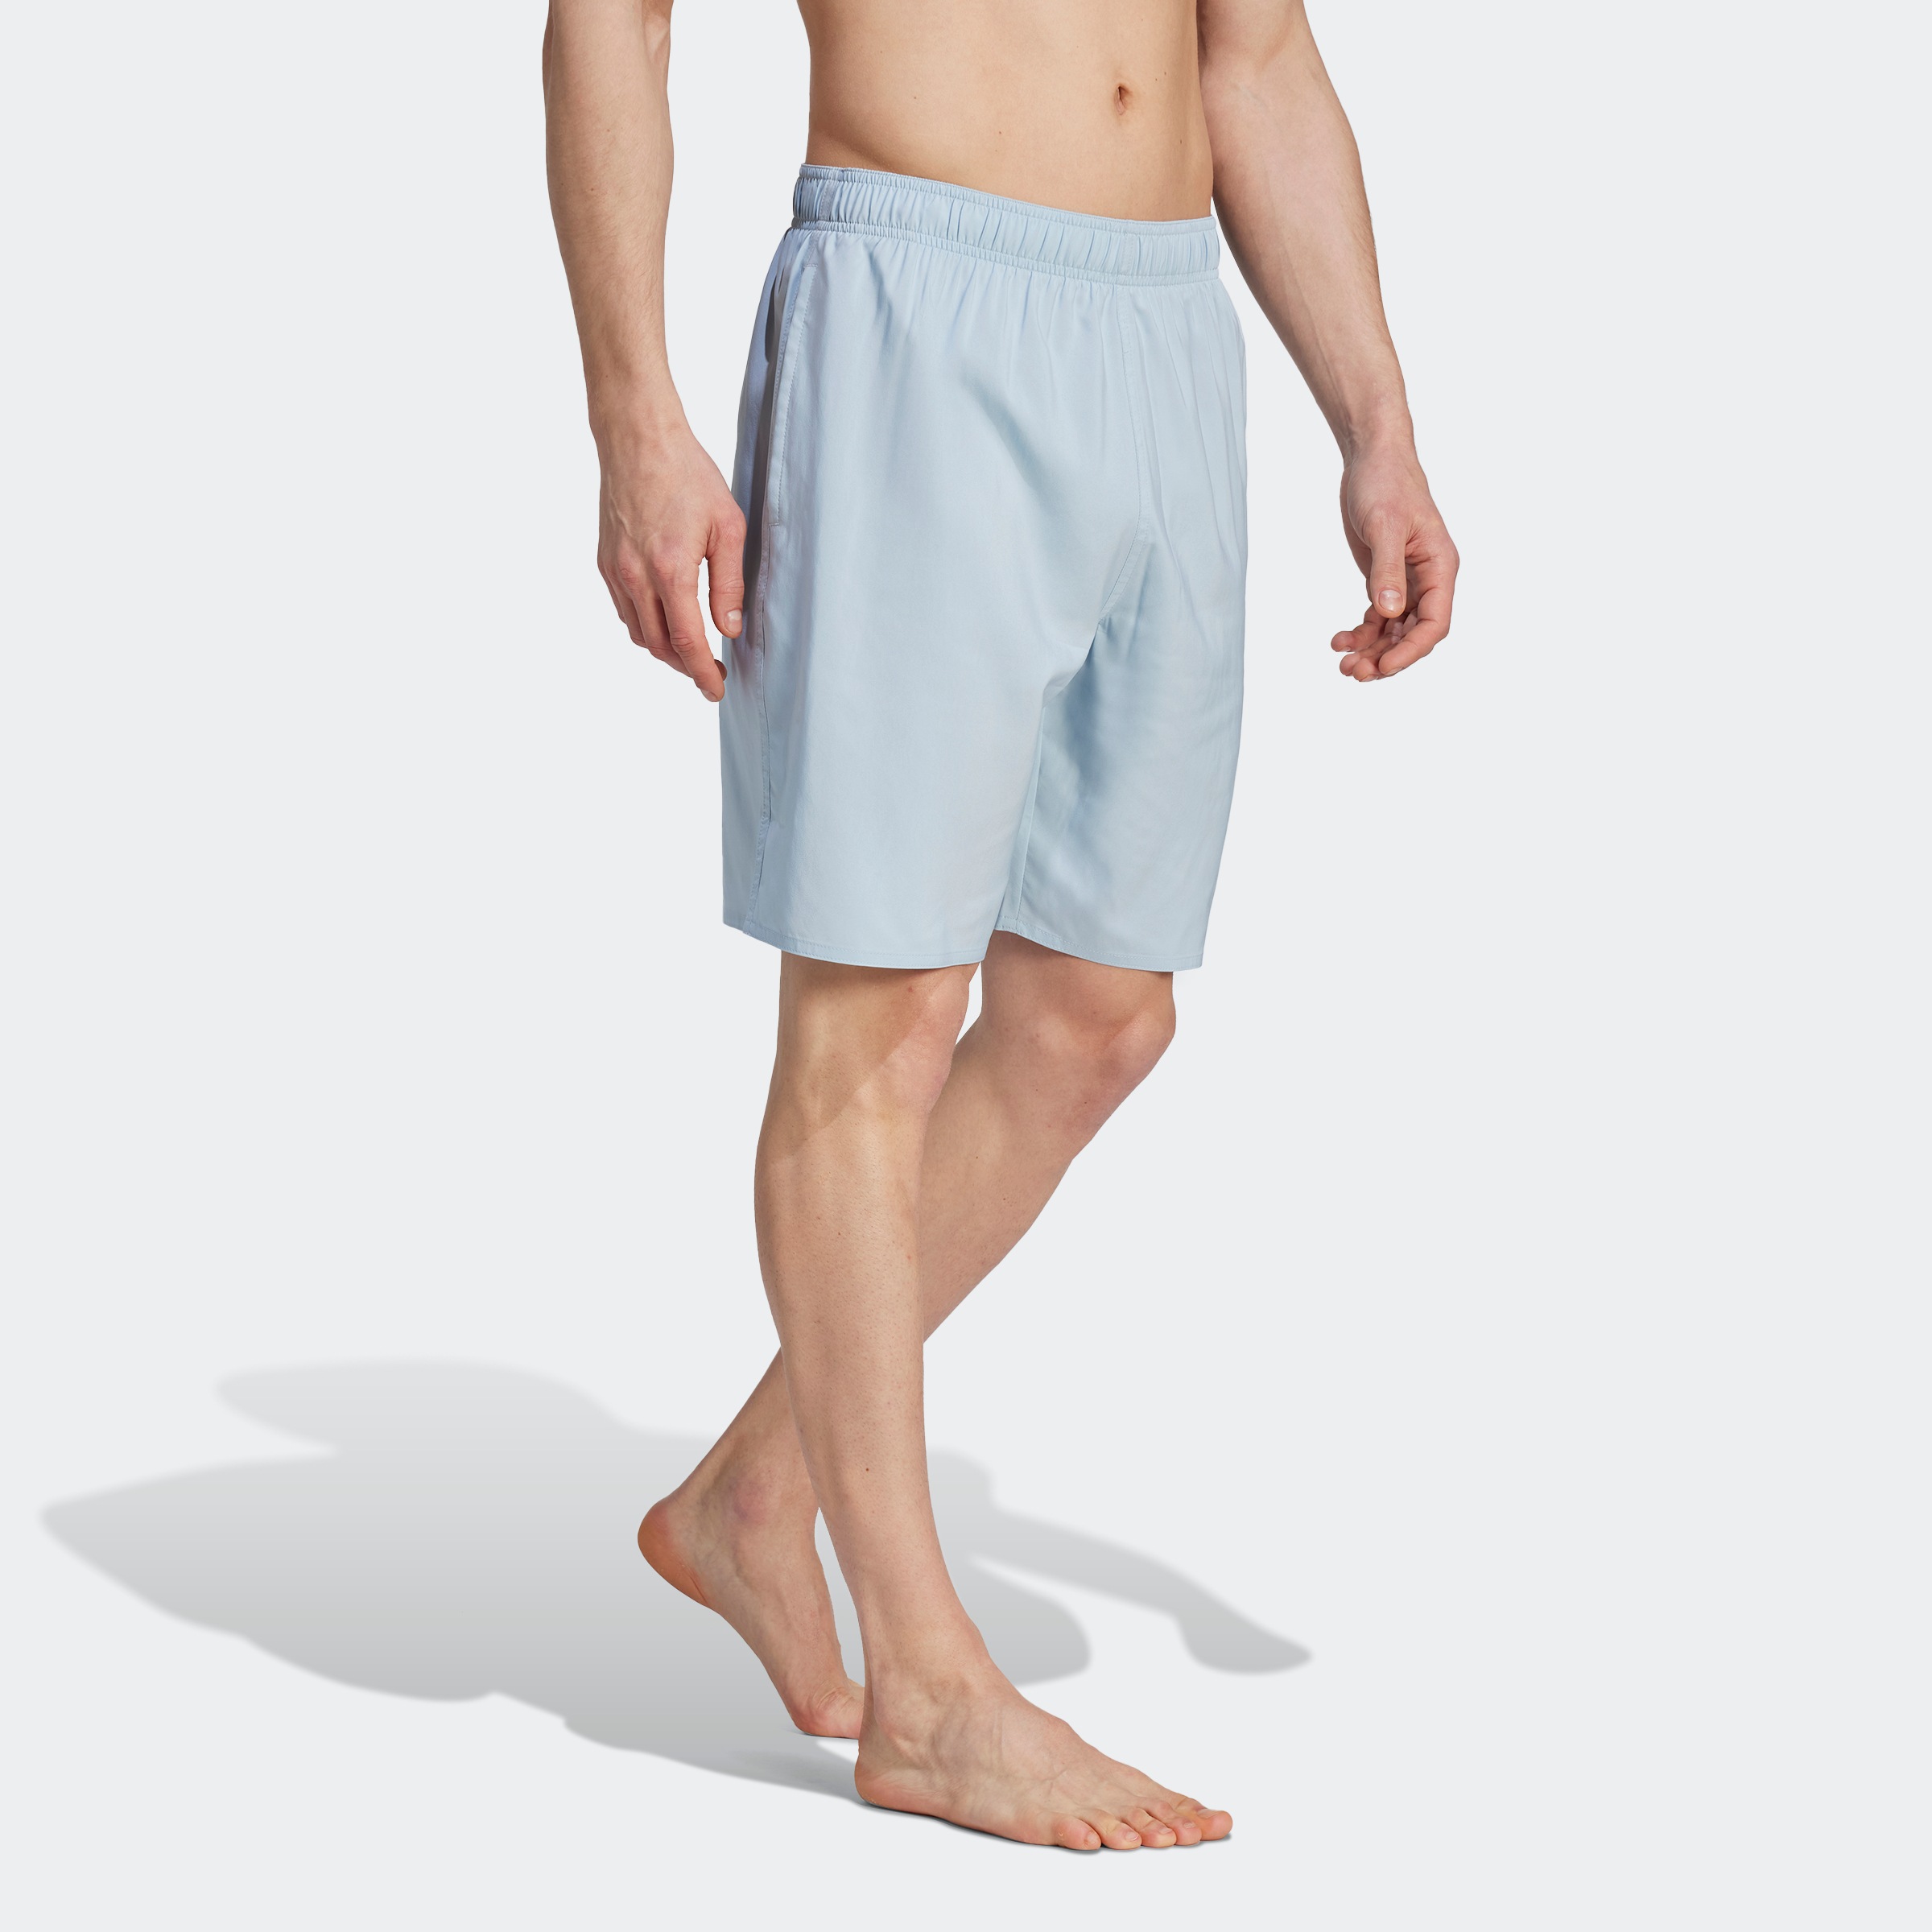 adidas Performance Badehose Online Shop CLASSICLENGTH«, (1 OTTO »SOLID St.) im CLX